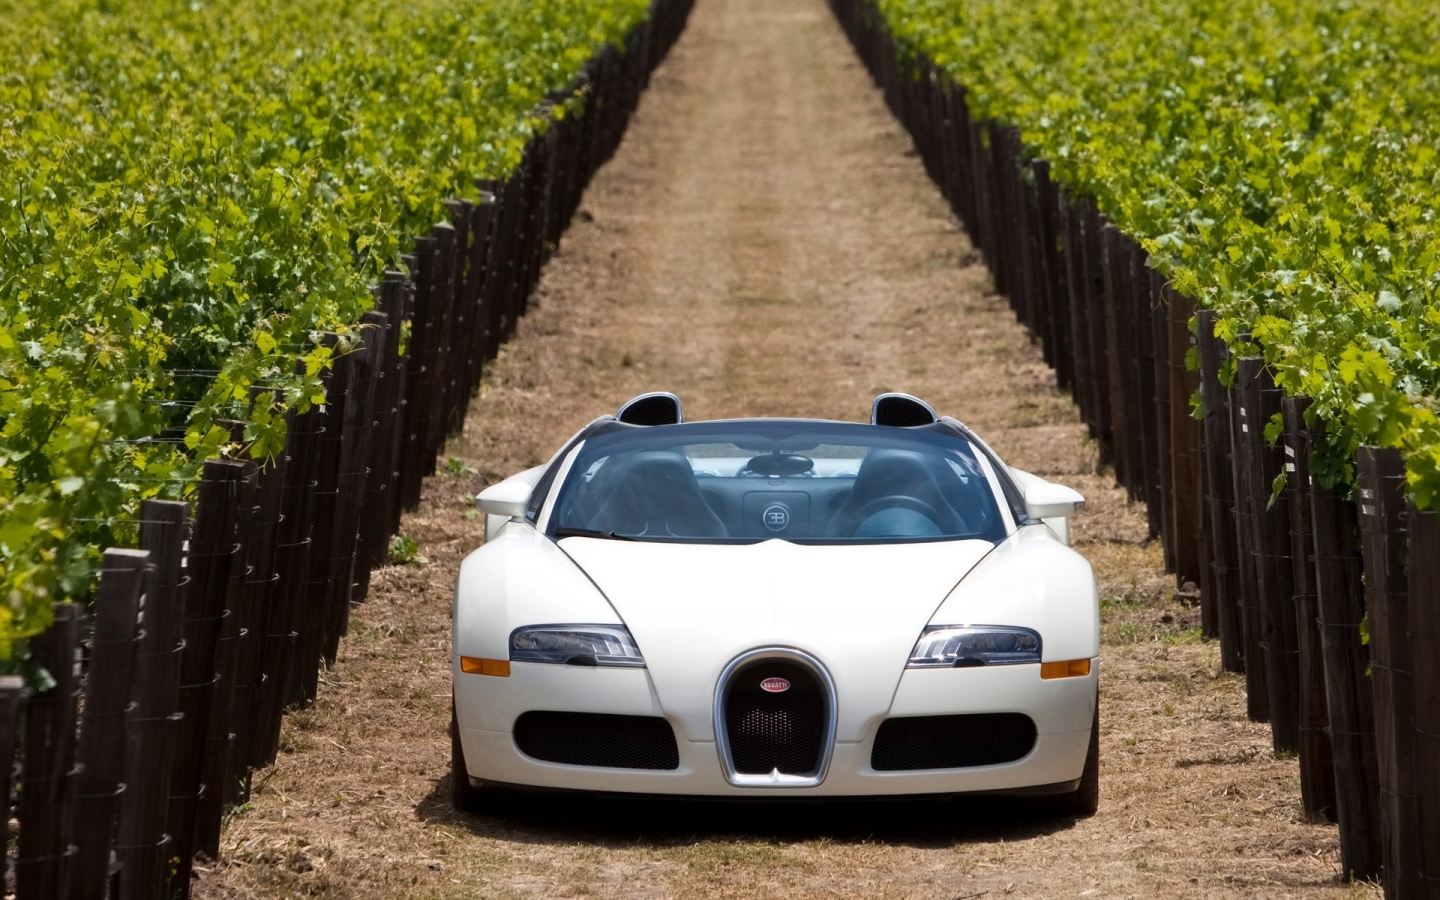 Bugatti Veyron 16.4 Grand Sport 2010 in Napa Valley - Front 3 for 1440 x 900 widescreen resolution